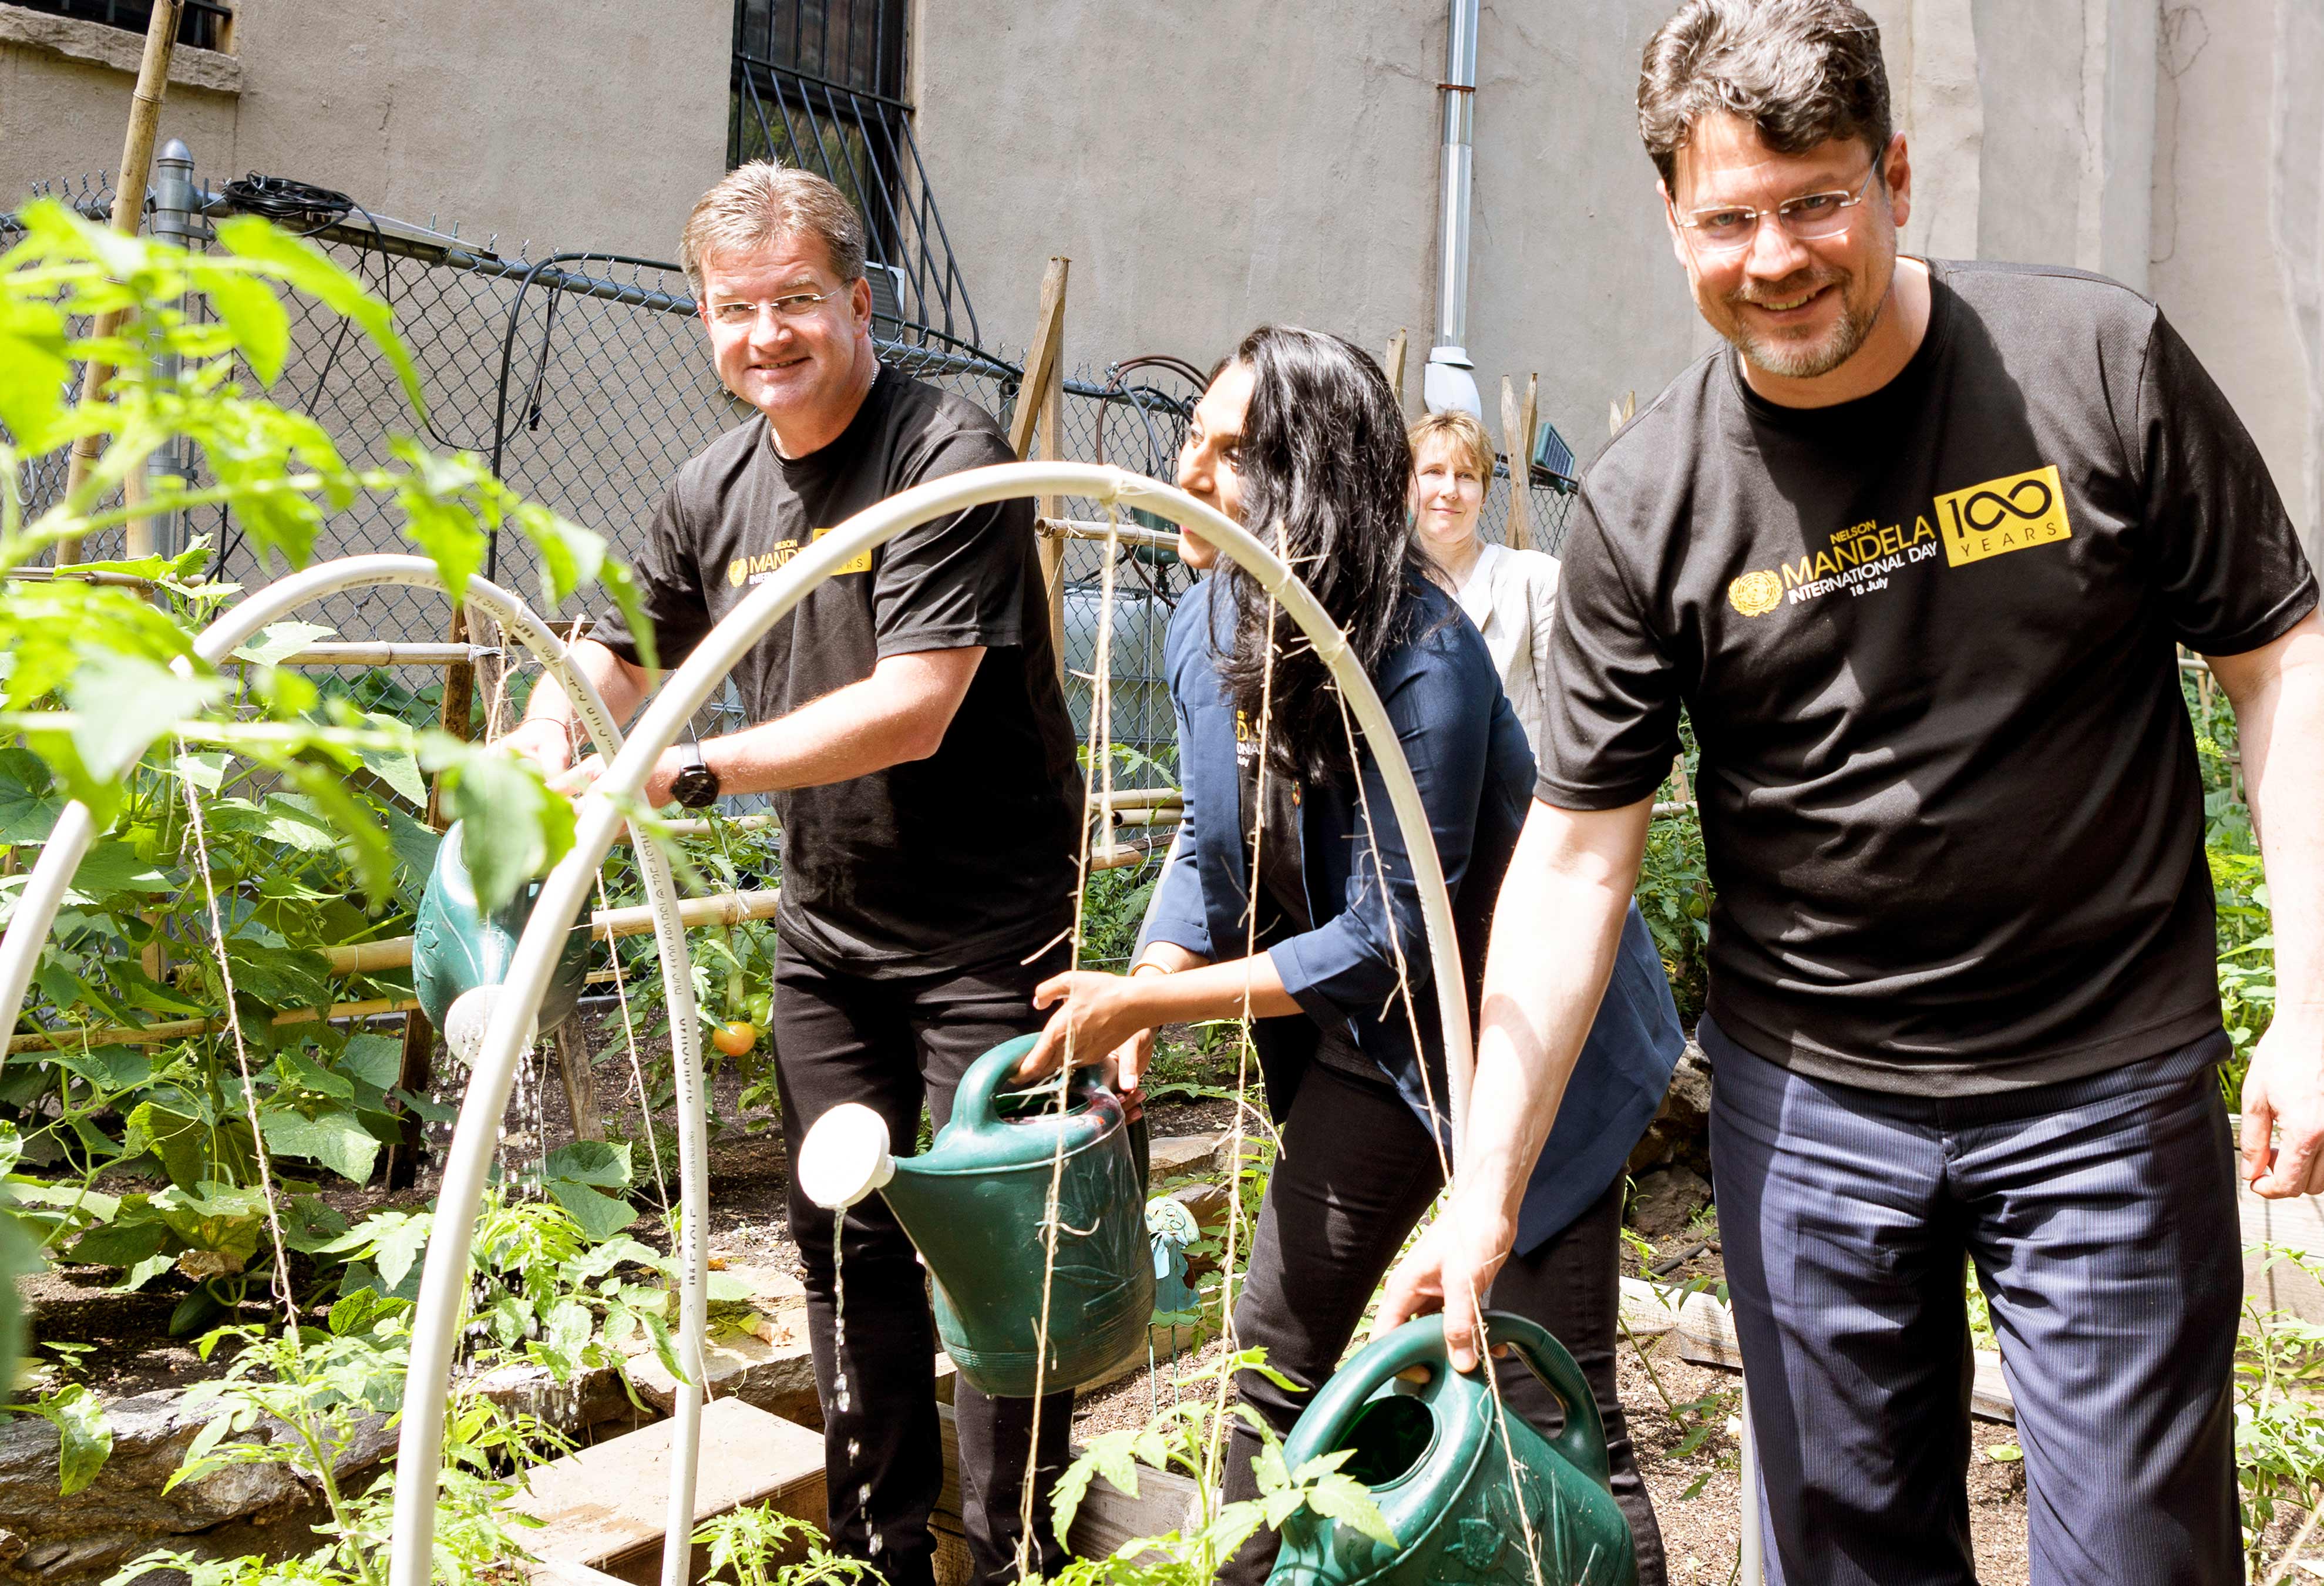 Miroslav Lajčák (left), President of the 72nd session of the General Assembly, Penny Abeywardena (centre), Commissioner of NYC, and Andries Carl Nel, Deputy Minister for Cooperative Governance and Traditional Affairs of South Africa, water plants at community garden Harlem Grown. © UN Photo/Manuel Elias